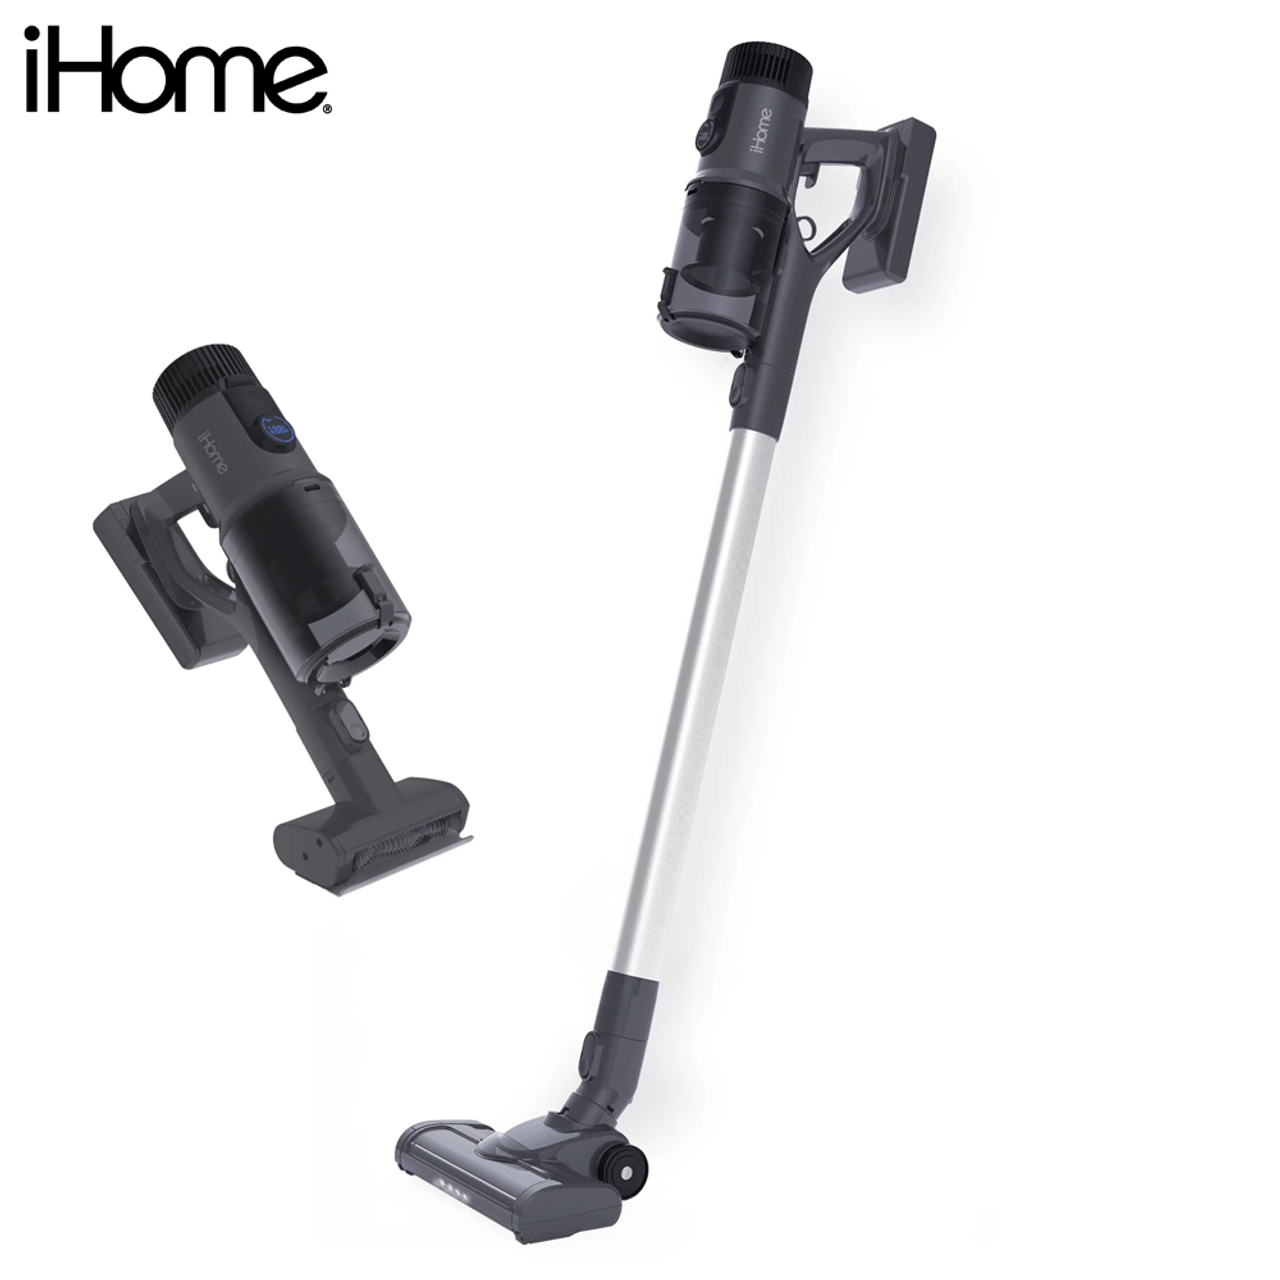 iHome® StickVac SV2 Lightweight Cordless Vacuum Cleaner product image